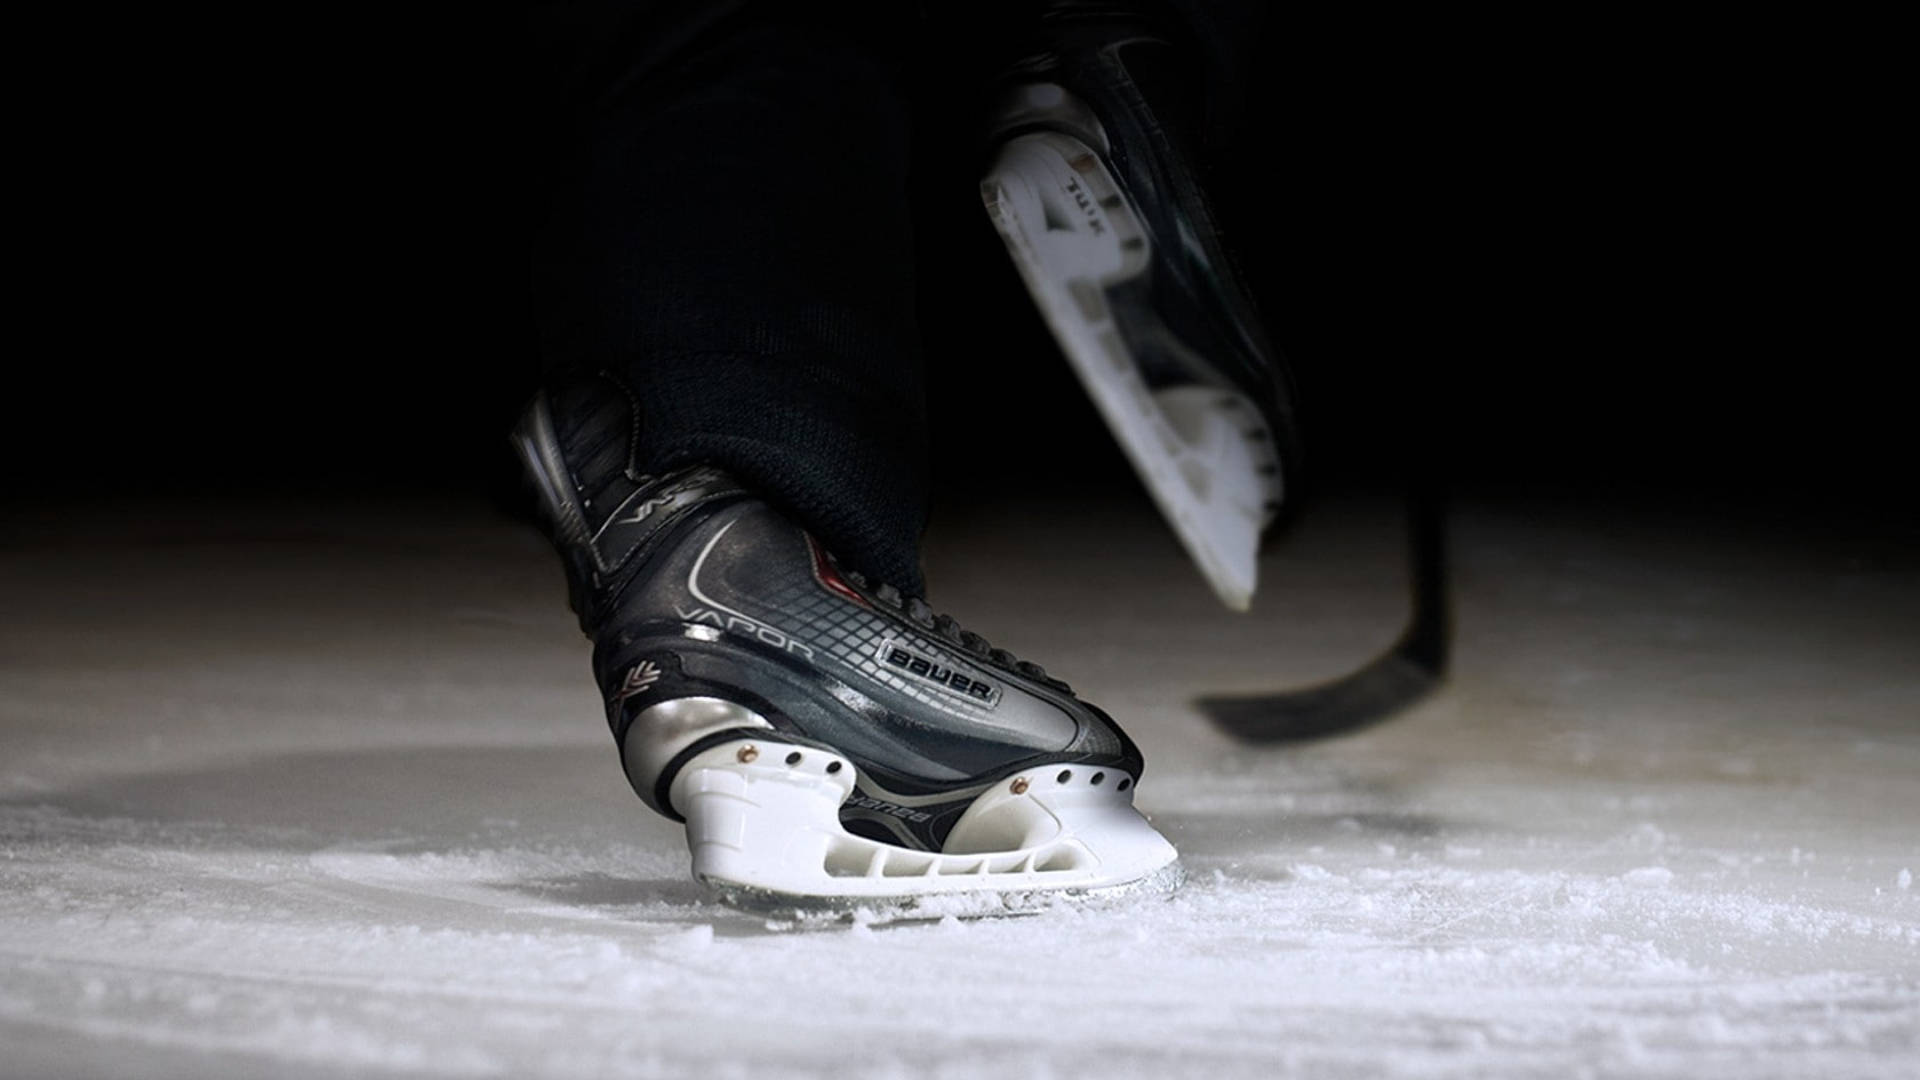 Fierce Ice Skating Blades Of A Hockey Player Background